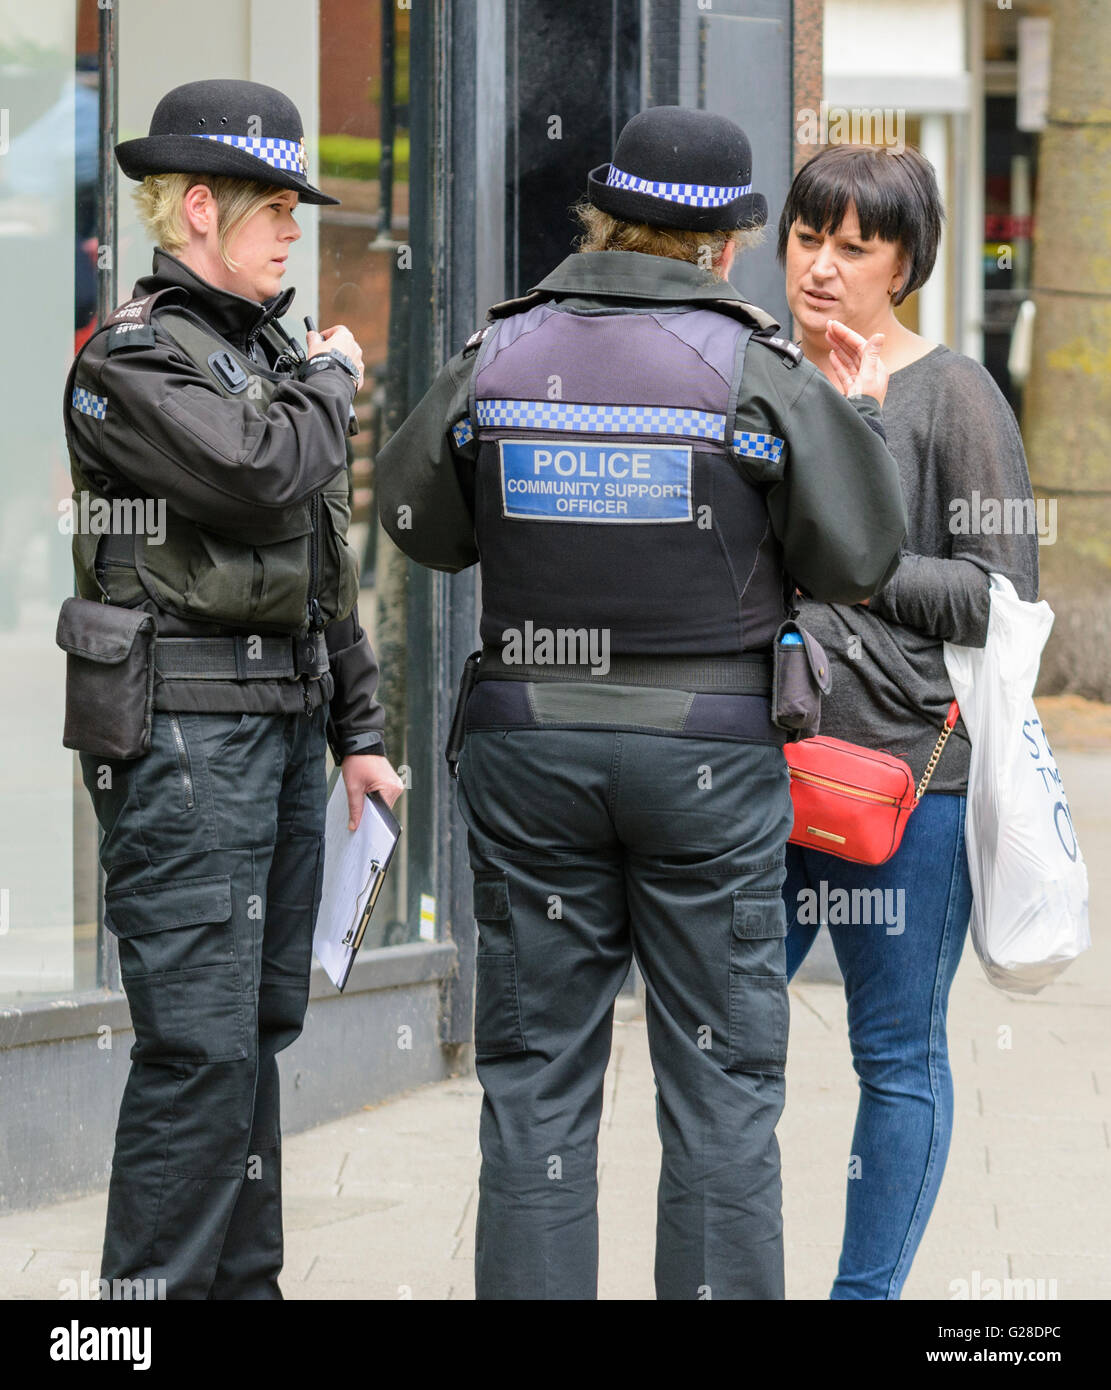 Police community support officers speaking to a pedestrian in a town in the UK. Stock Photo